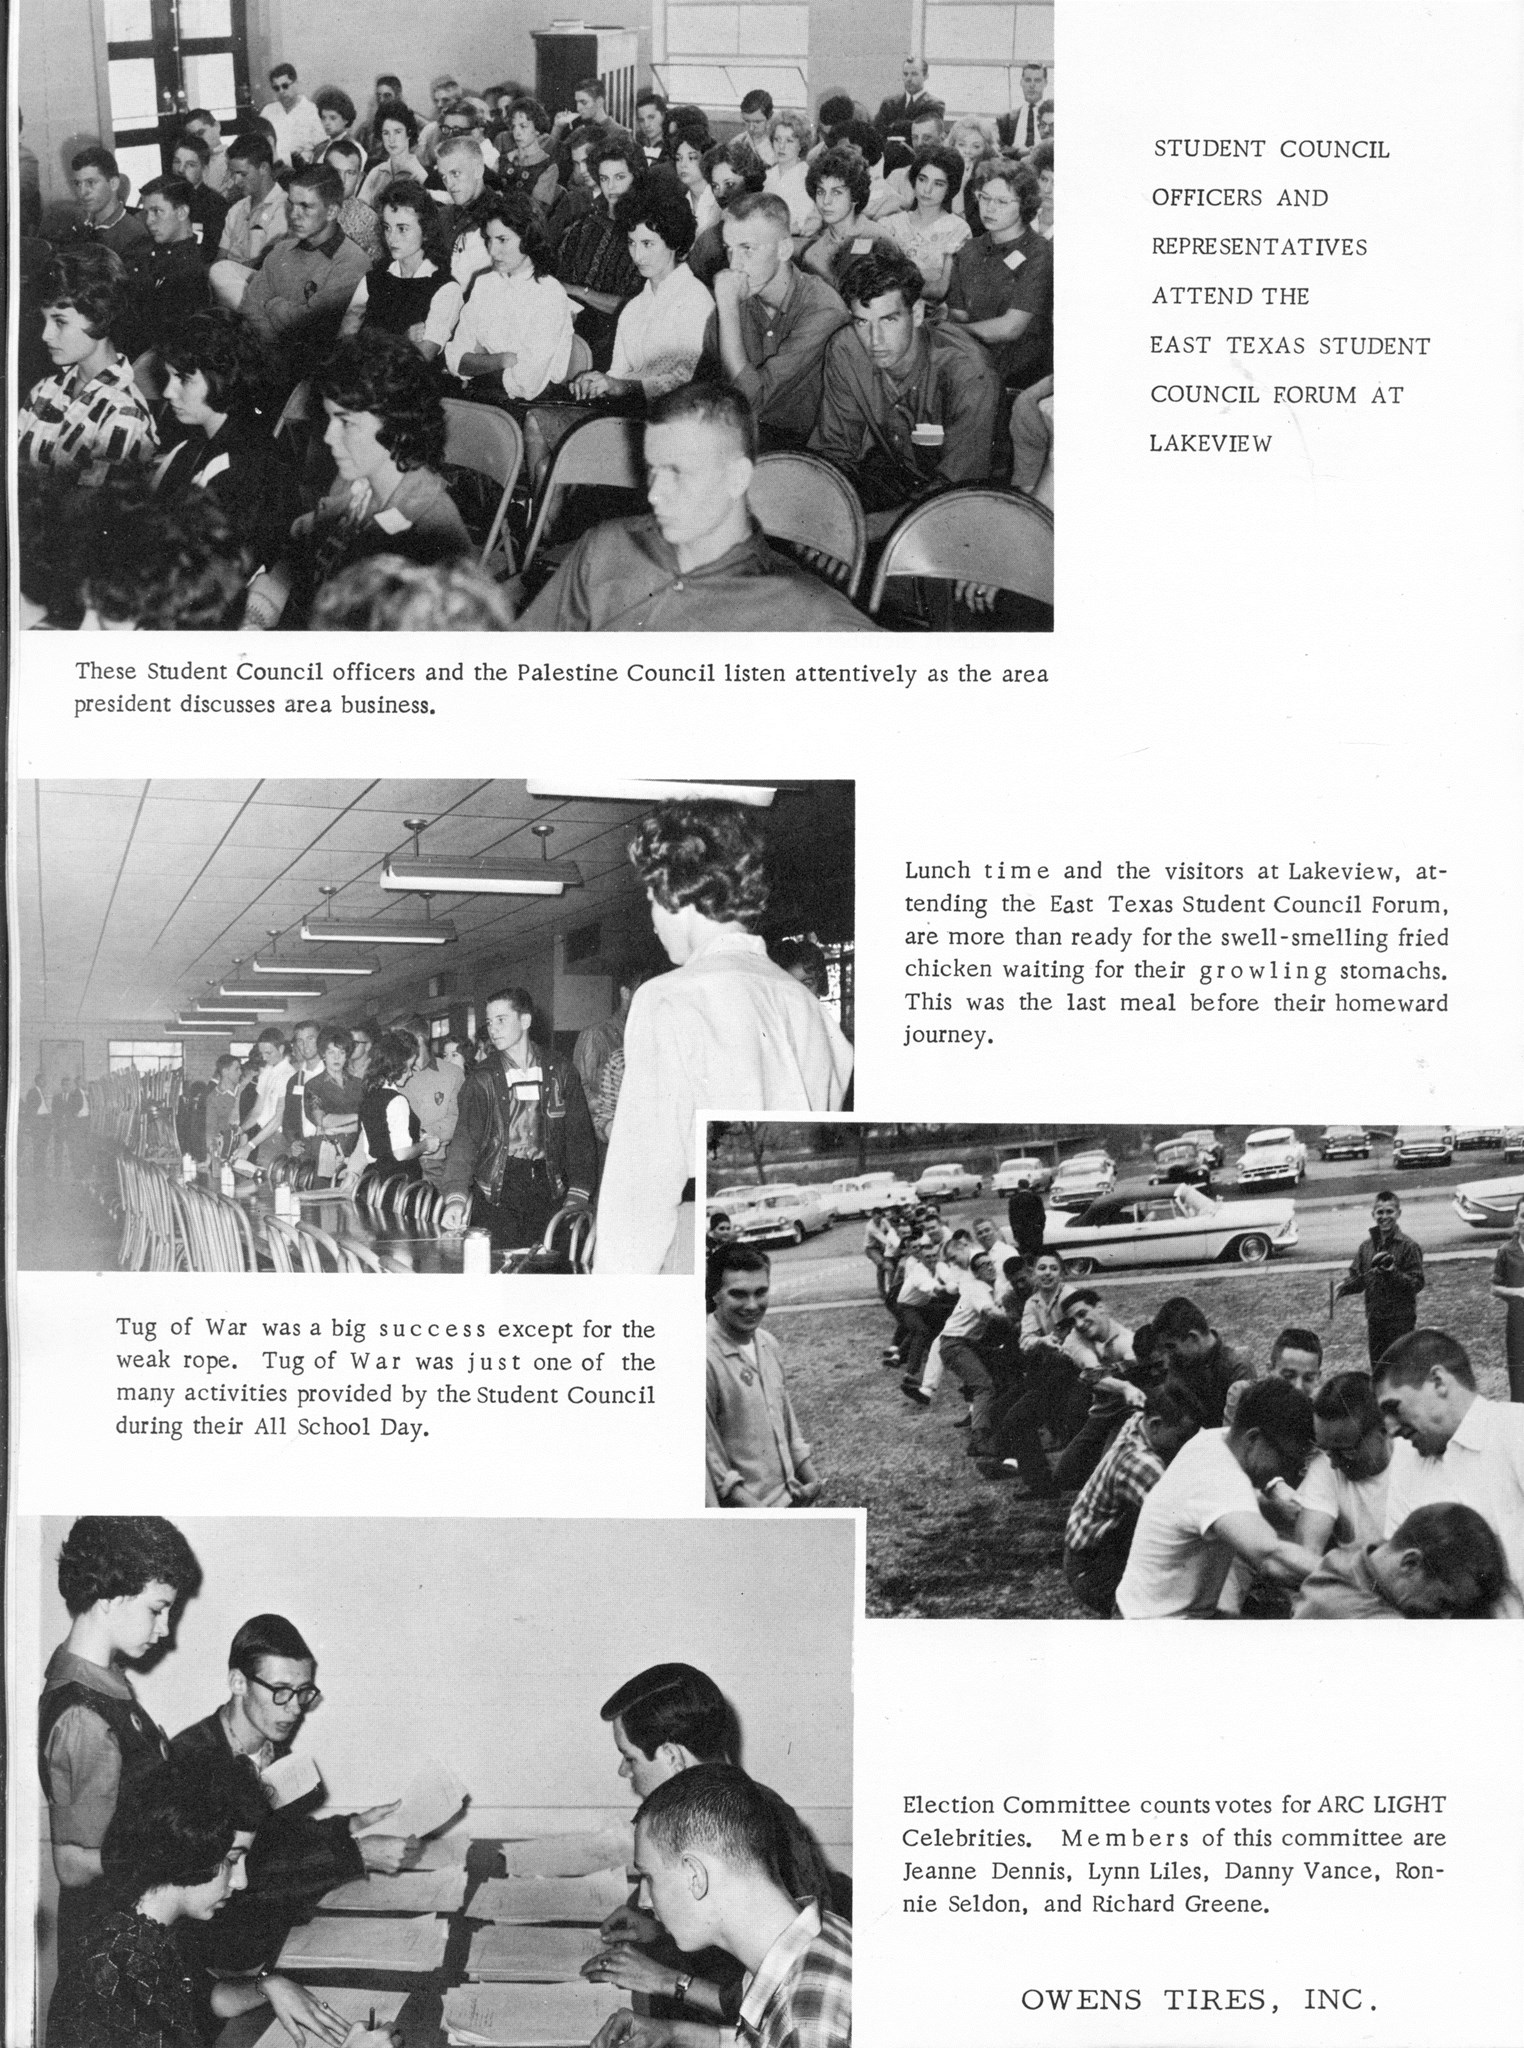 ../../../Images/Large/1962/Arclight-1962-pg0116.jpg